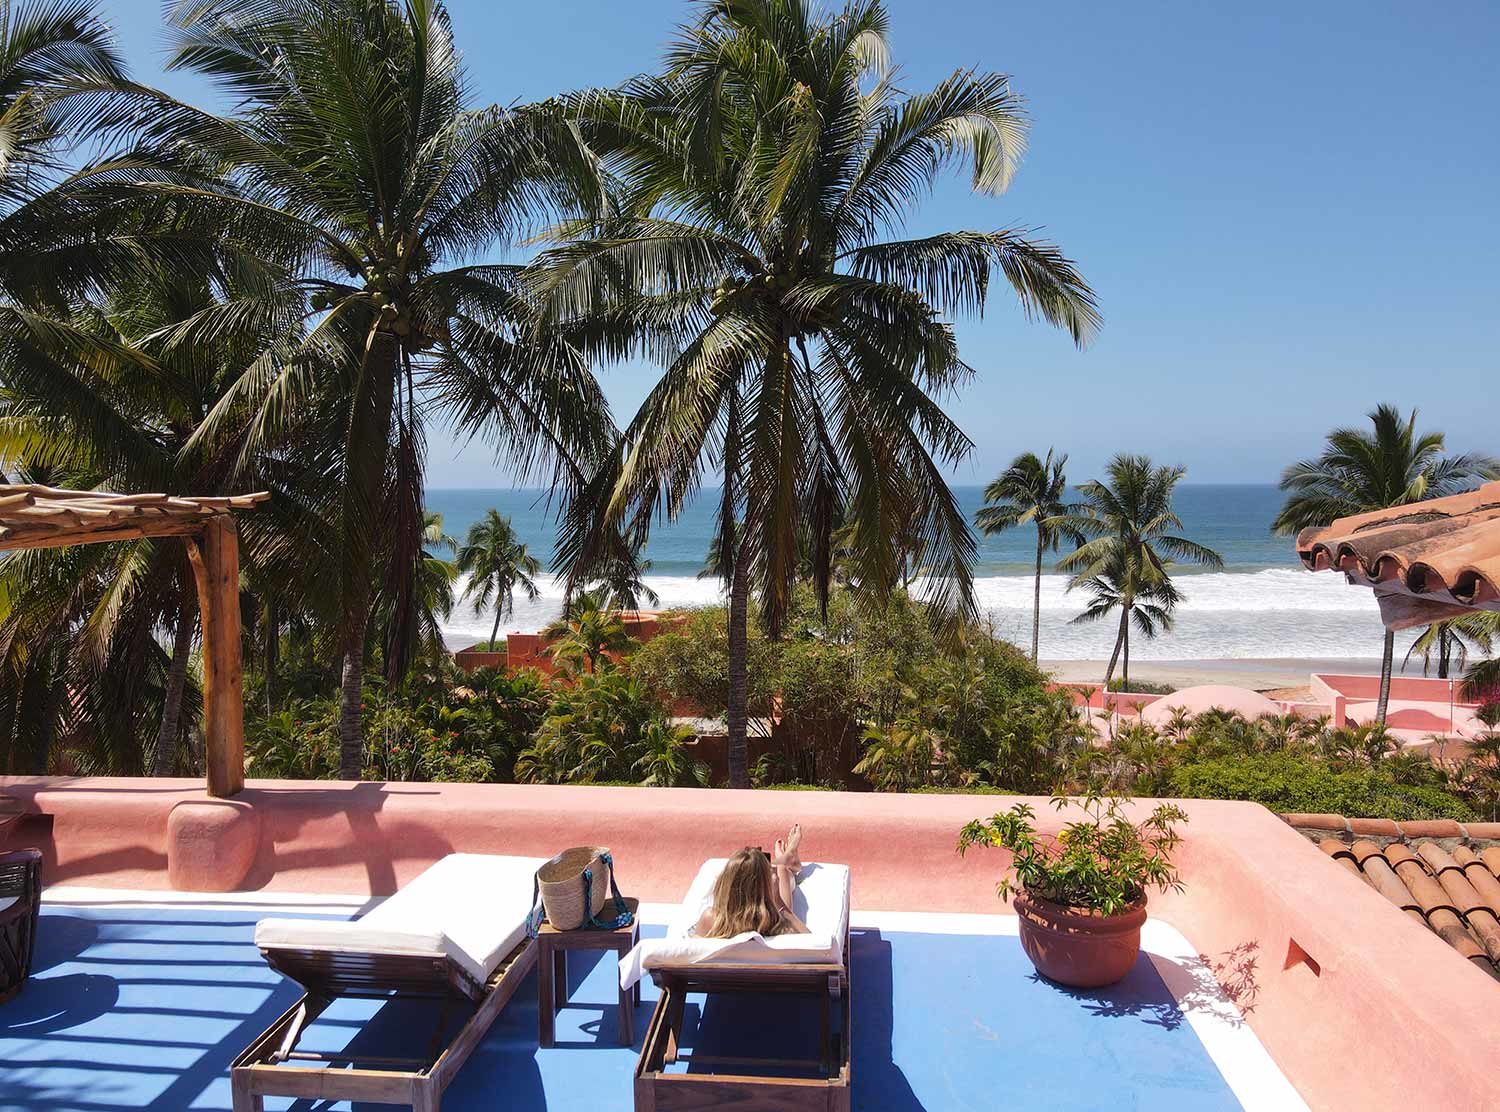 Las Alamandas A drone selfie while soaking in some rays on our private roof terrace